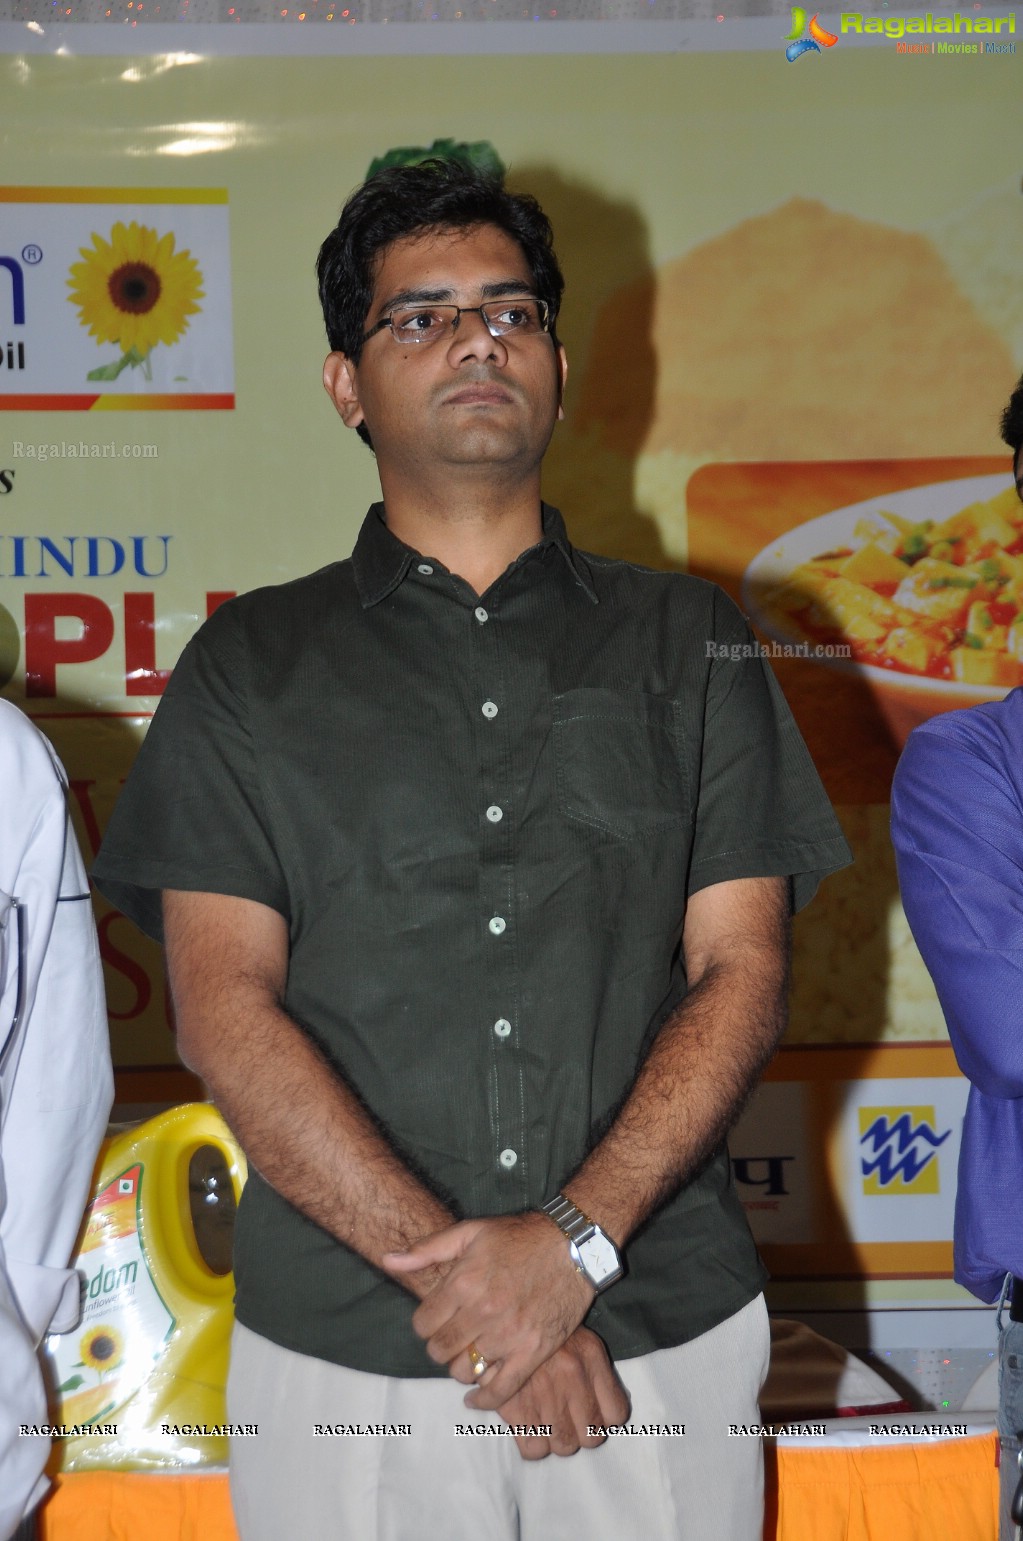 Freedom Refined Sunflower Oil 'Cookery Contest 2013'